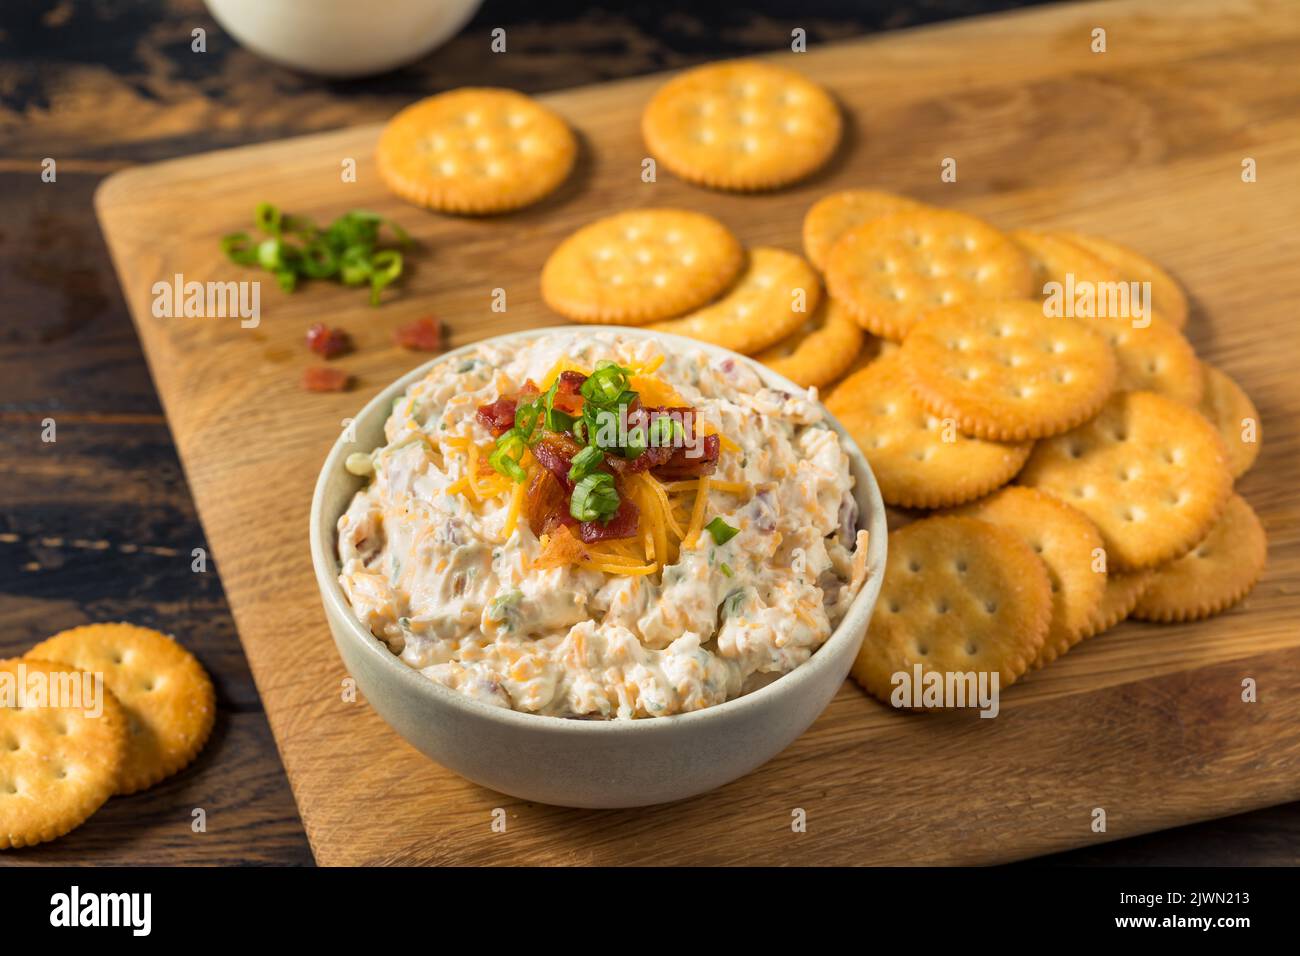 Homemade Creamy Bacon Crack Dip Appetizer with Mayo Stock Photo